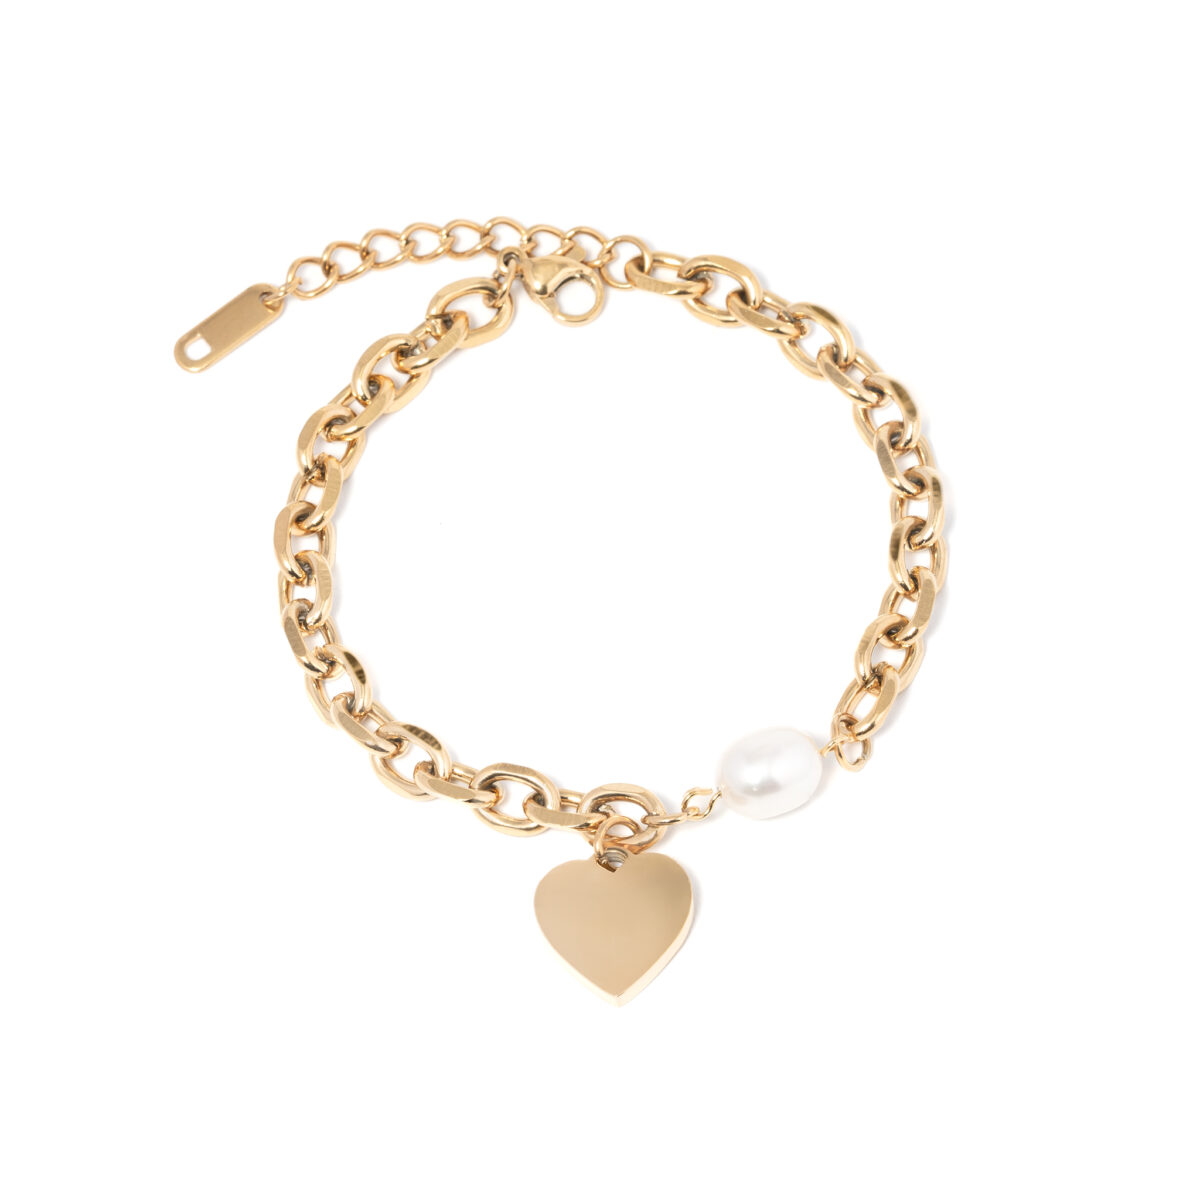 https://m.clubbella.co/product/agate-gold-heart-charm-bracelet/ Agate Gold Heart Charm Bracelet (8)